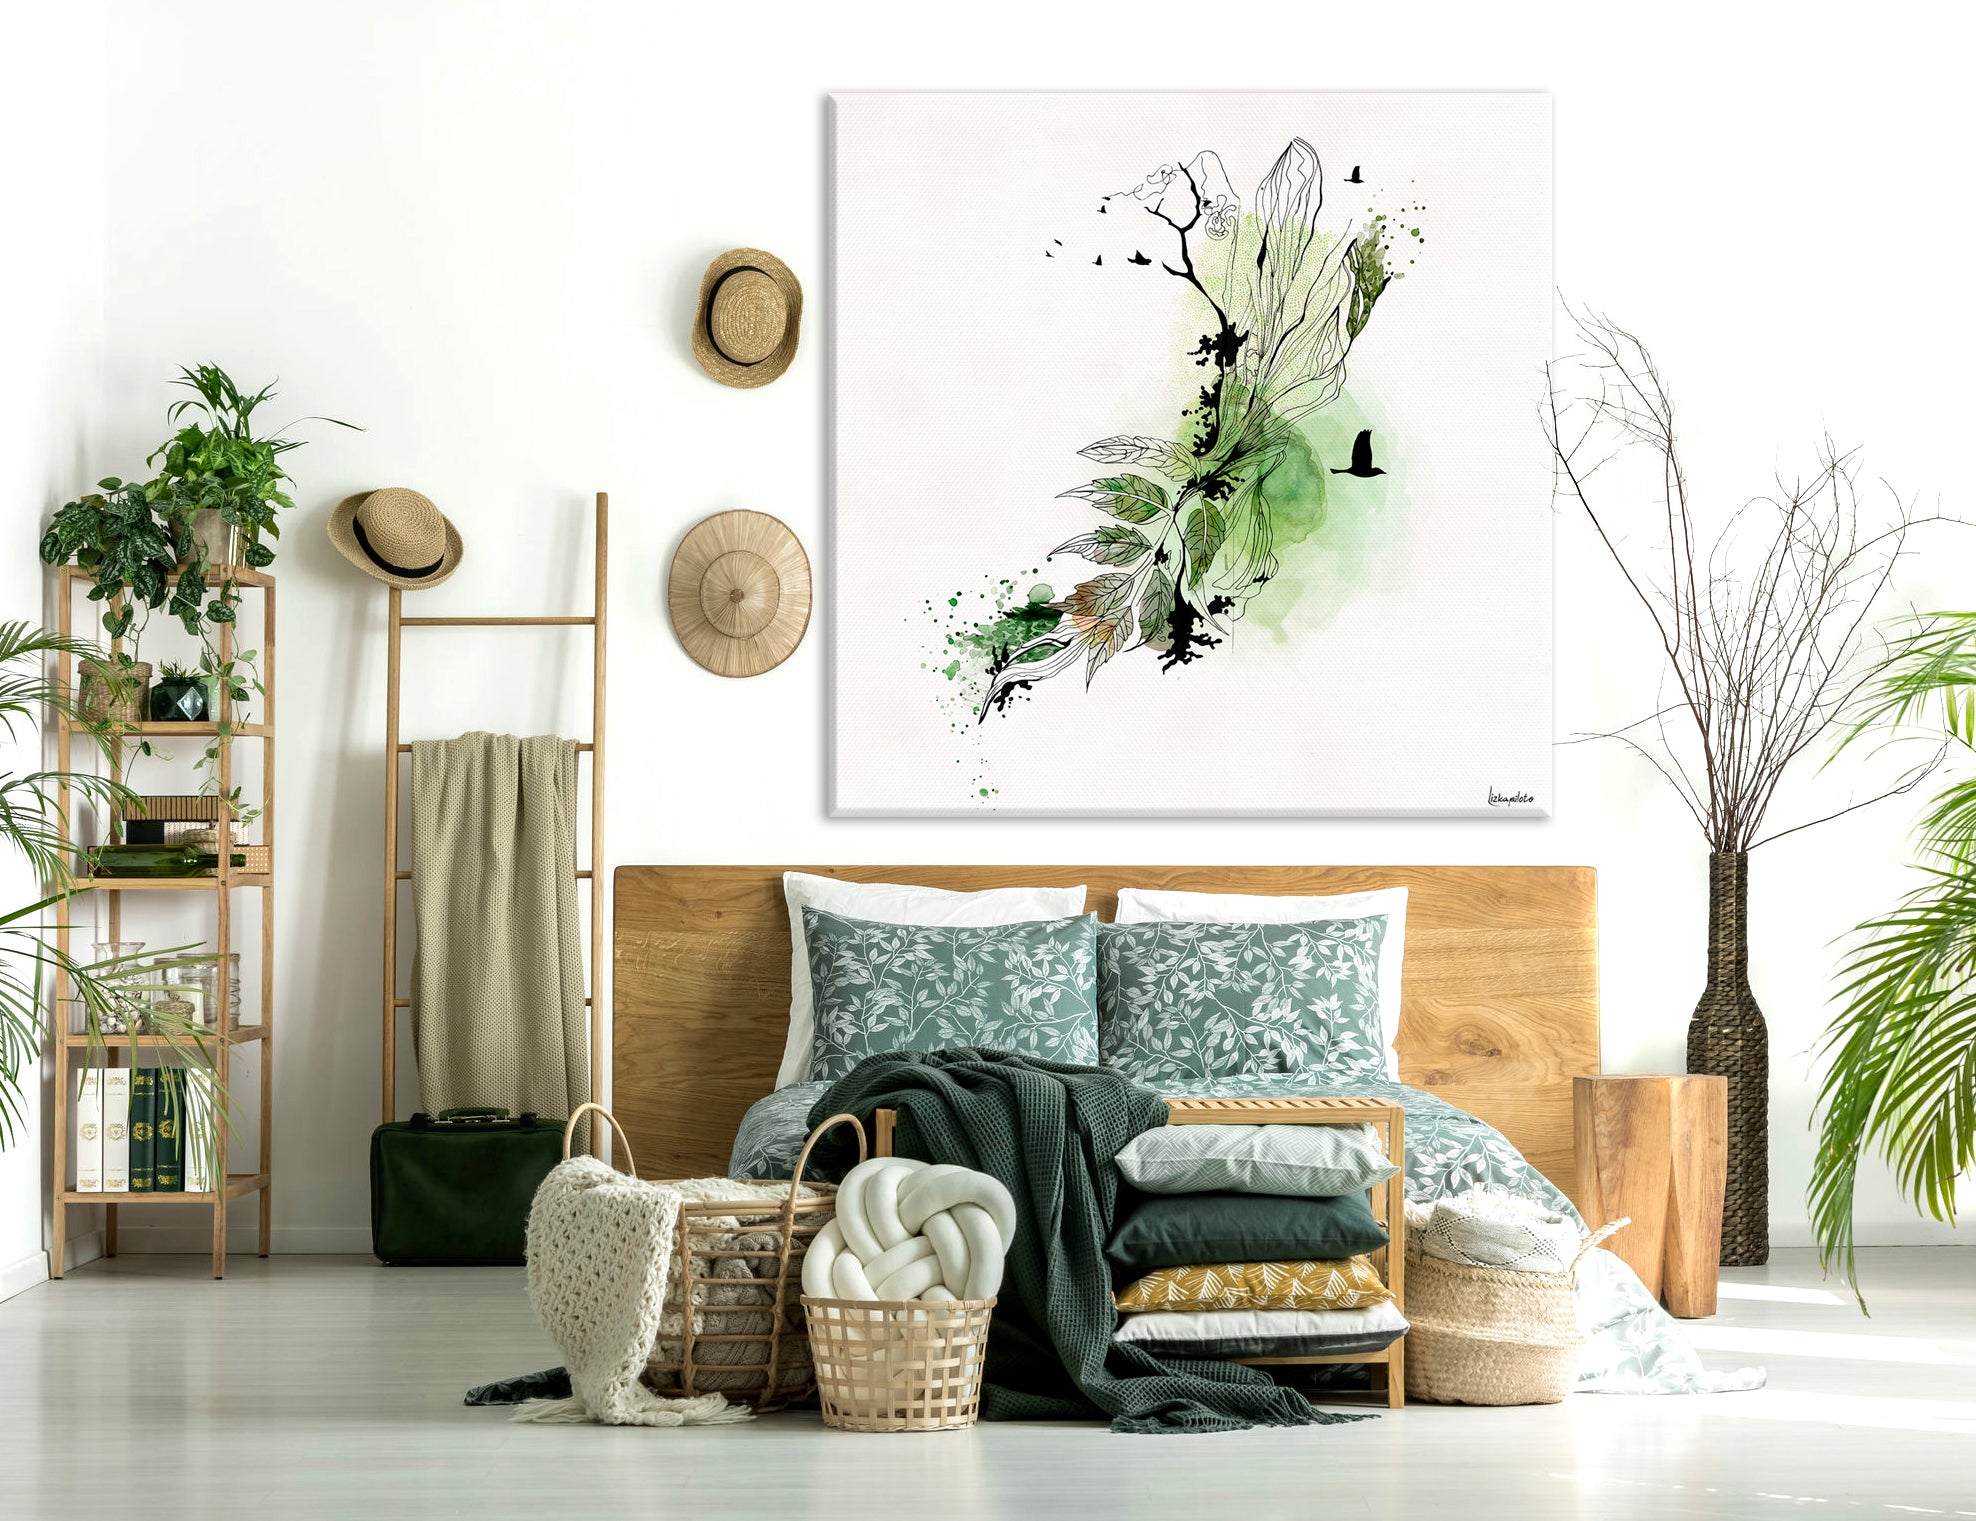 Large abstract painting on bedroom wall